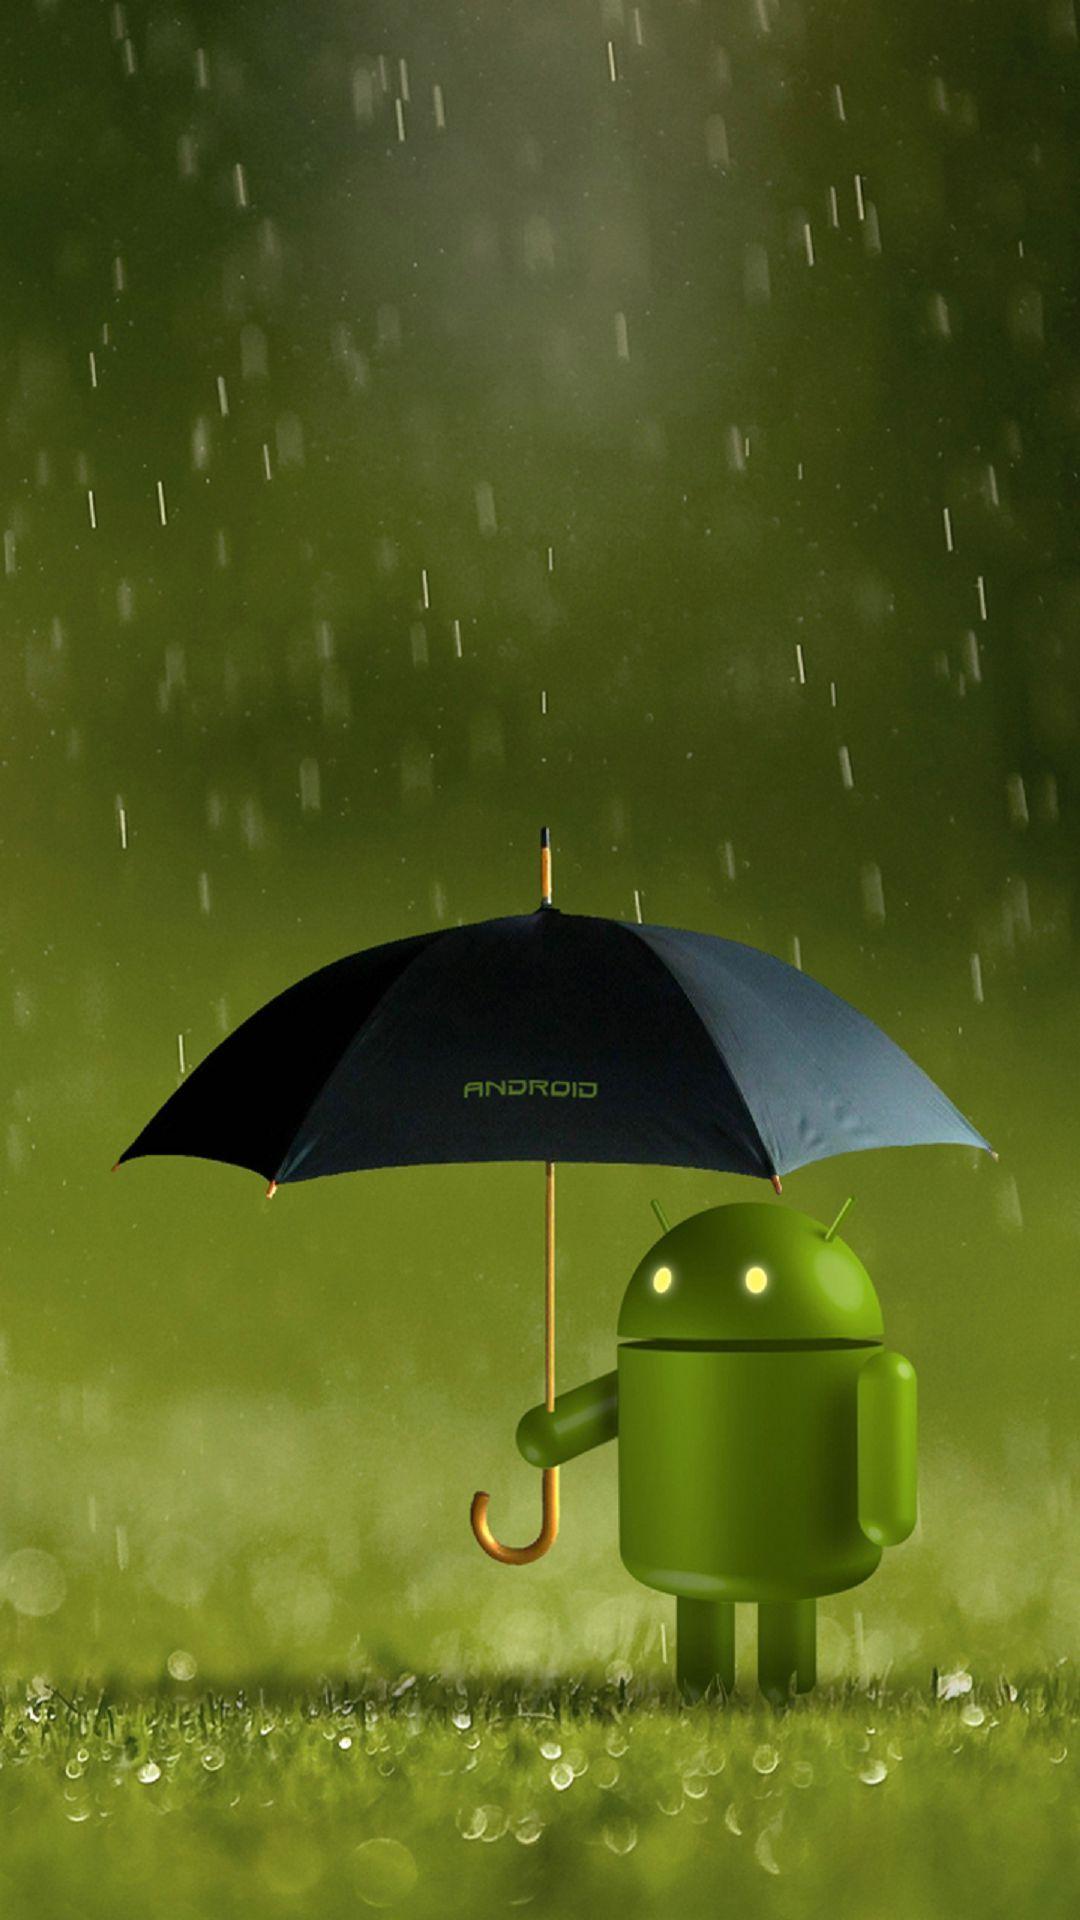 Android Robot Doll Rain htc one wallpaper